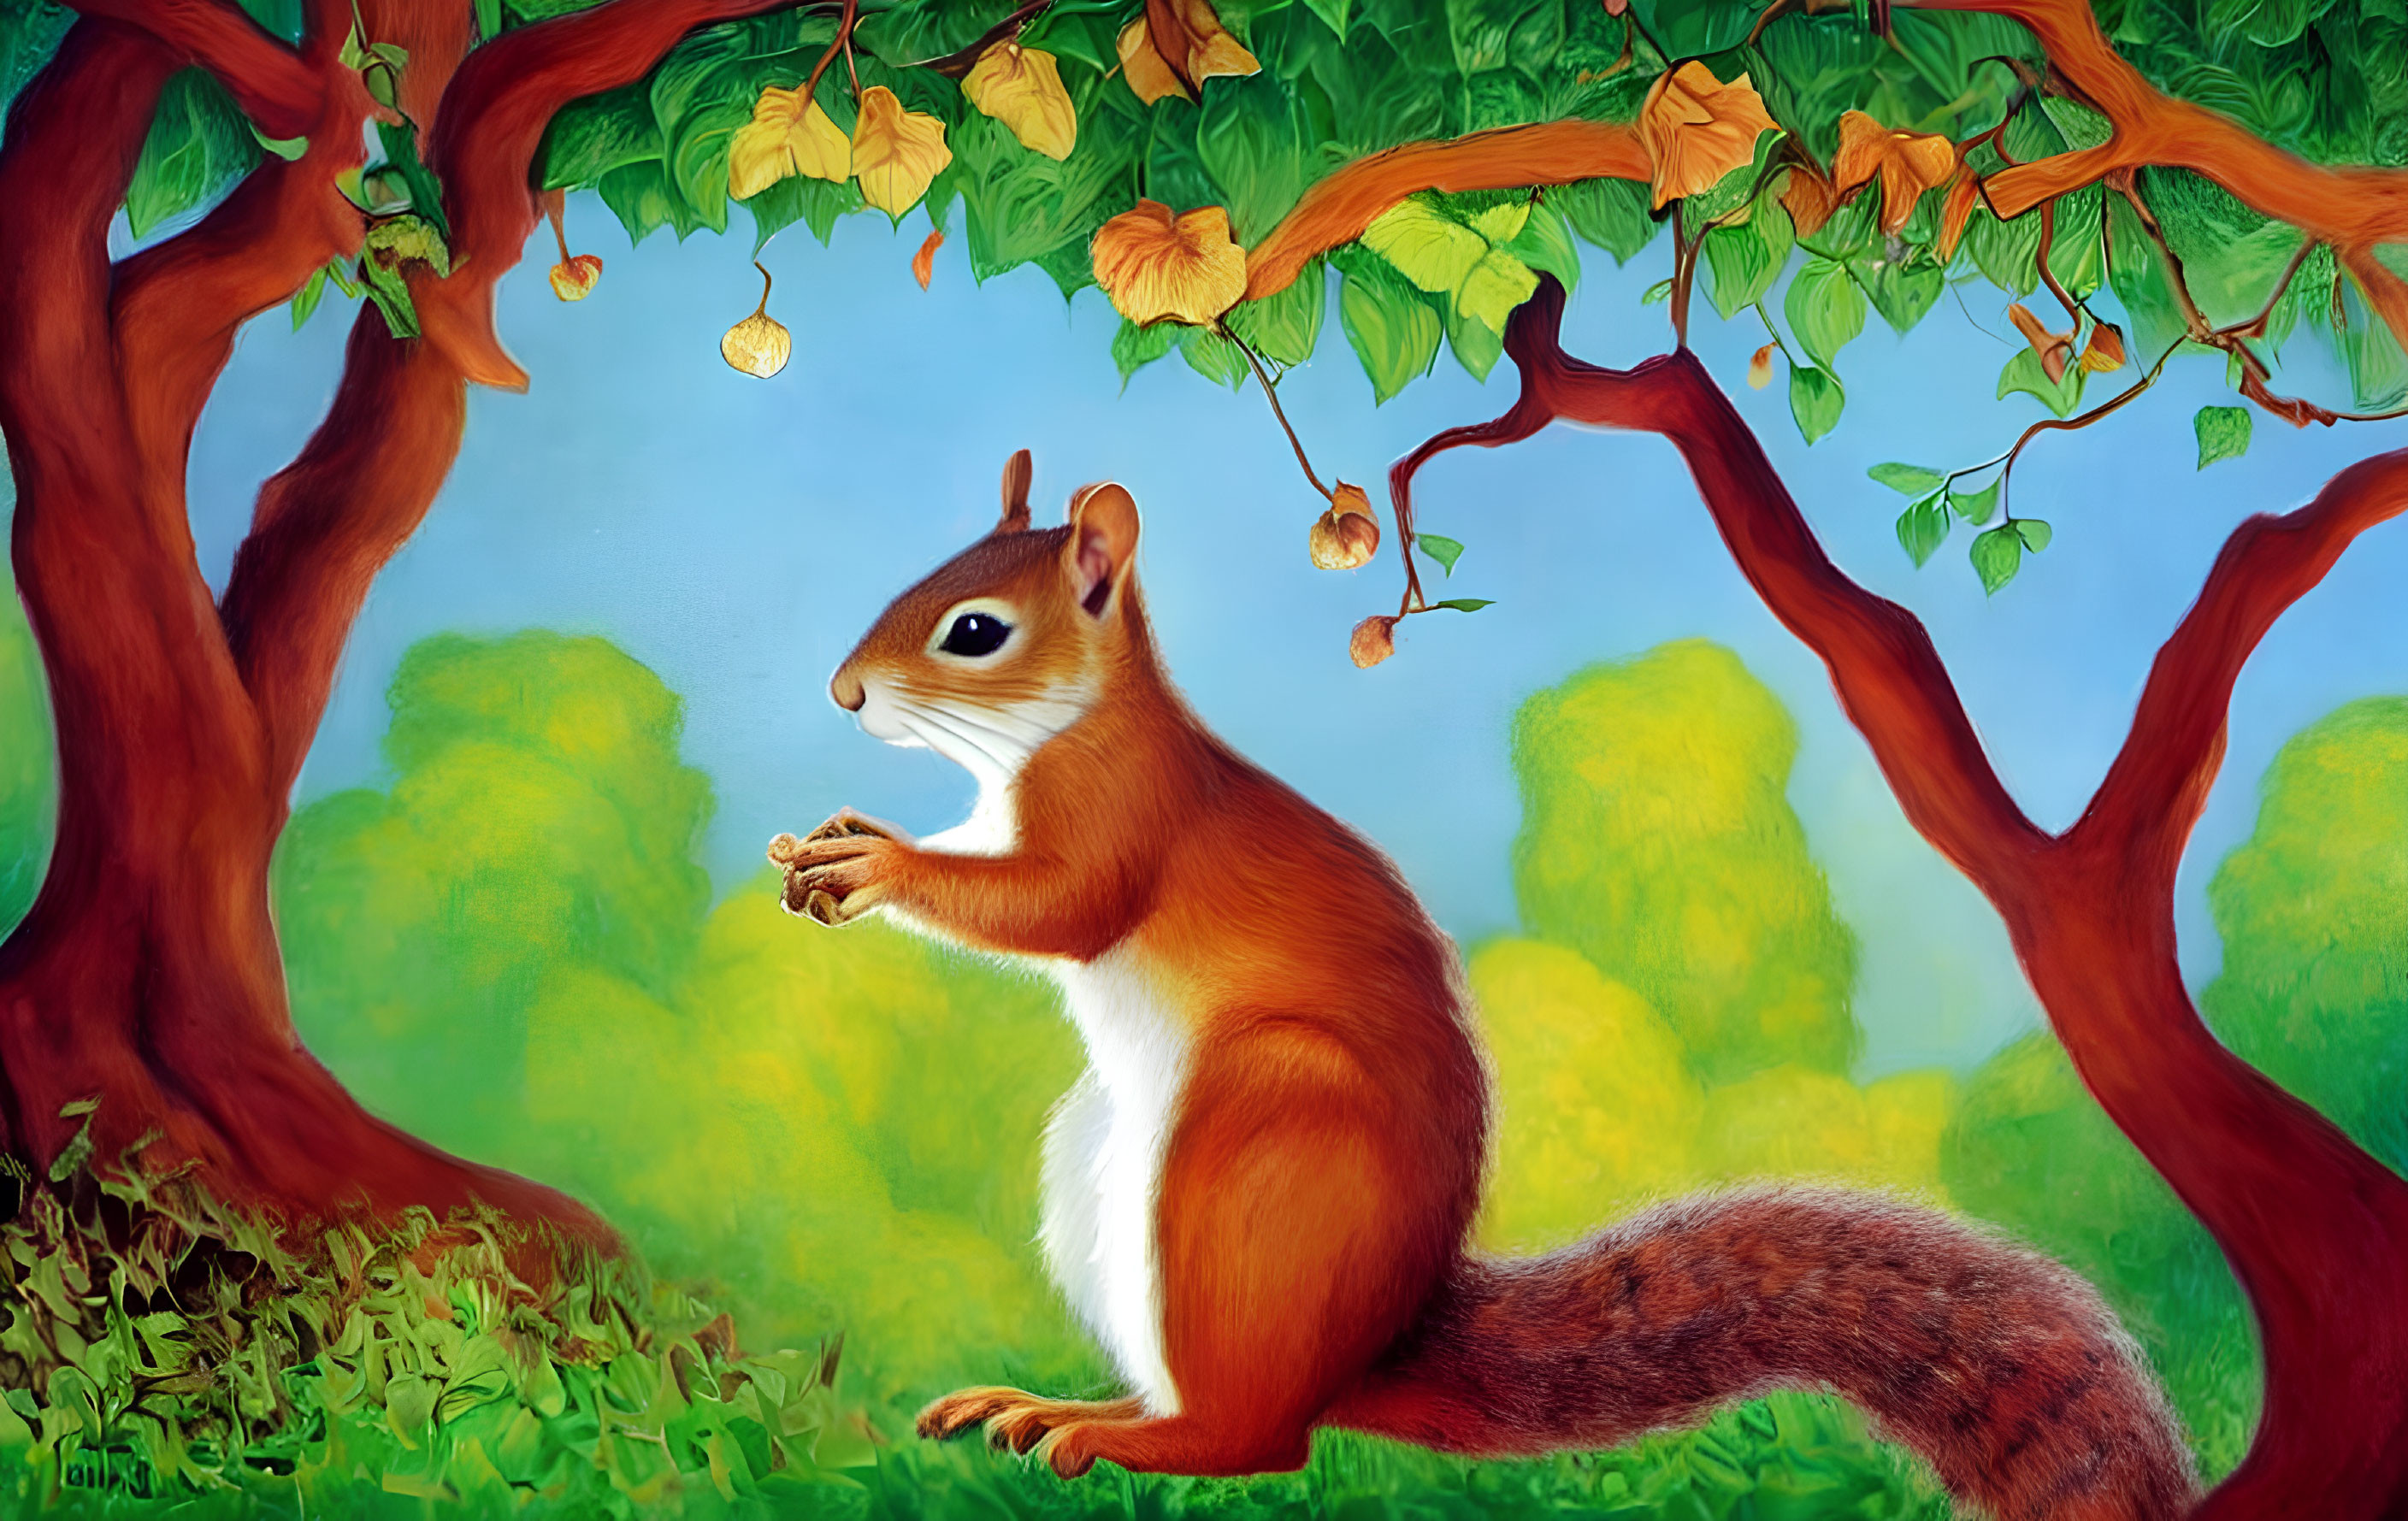 Colorful illustration of plump red squirrel in forest setting